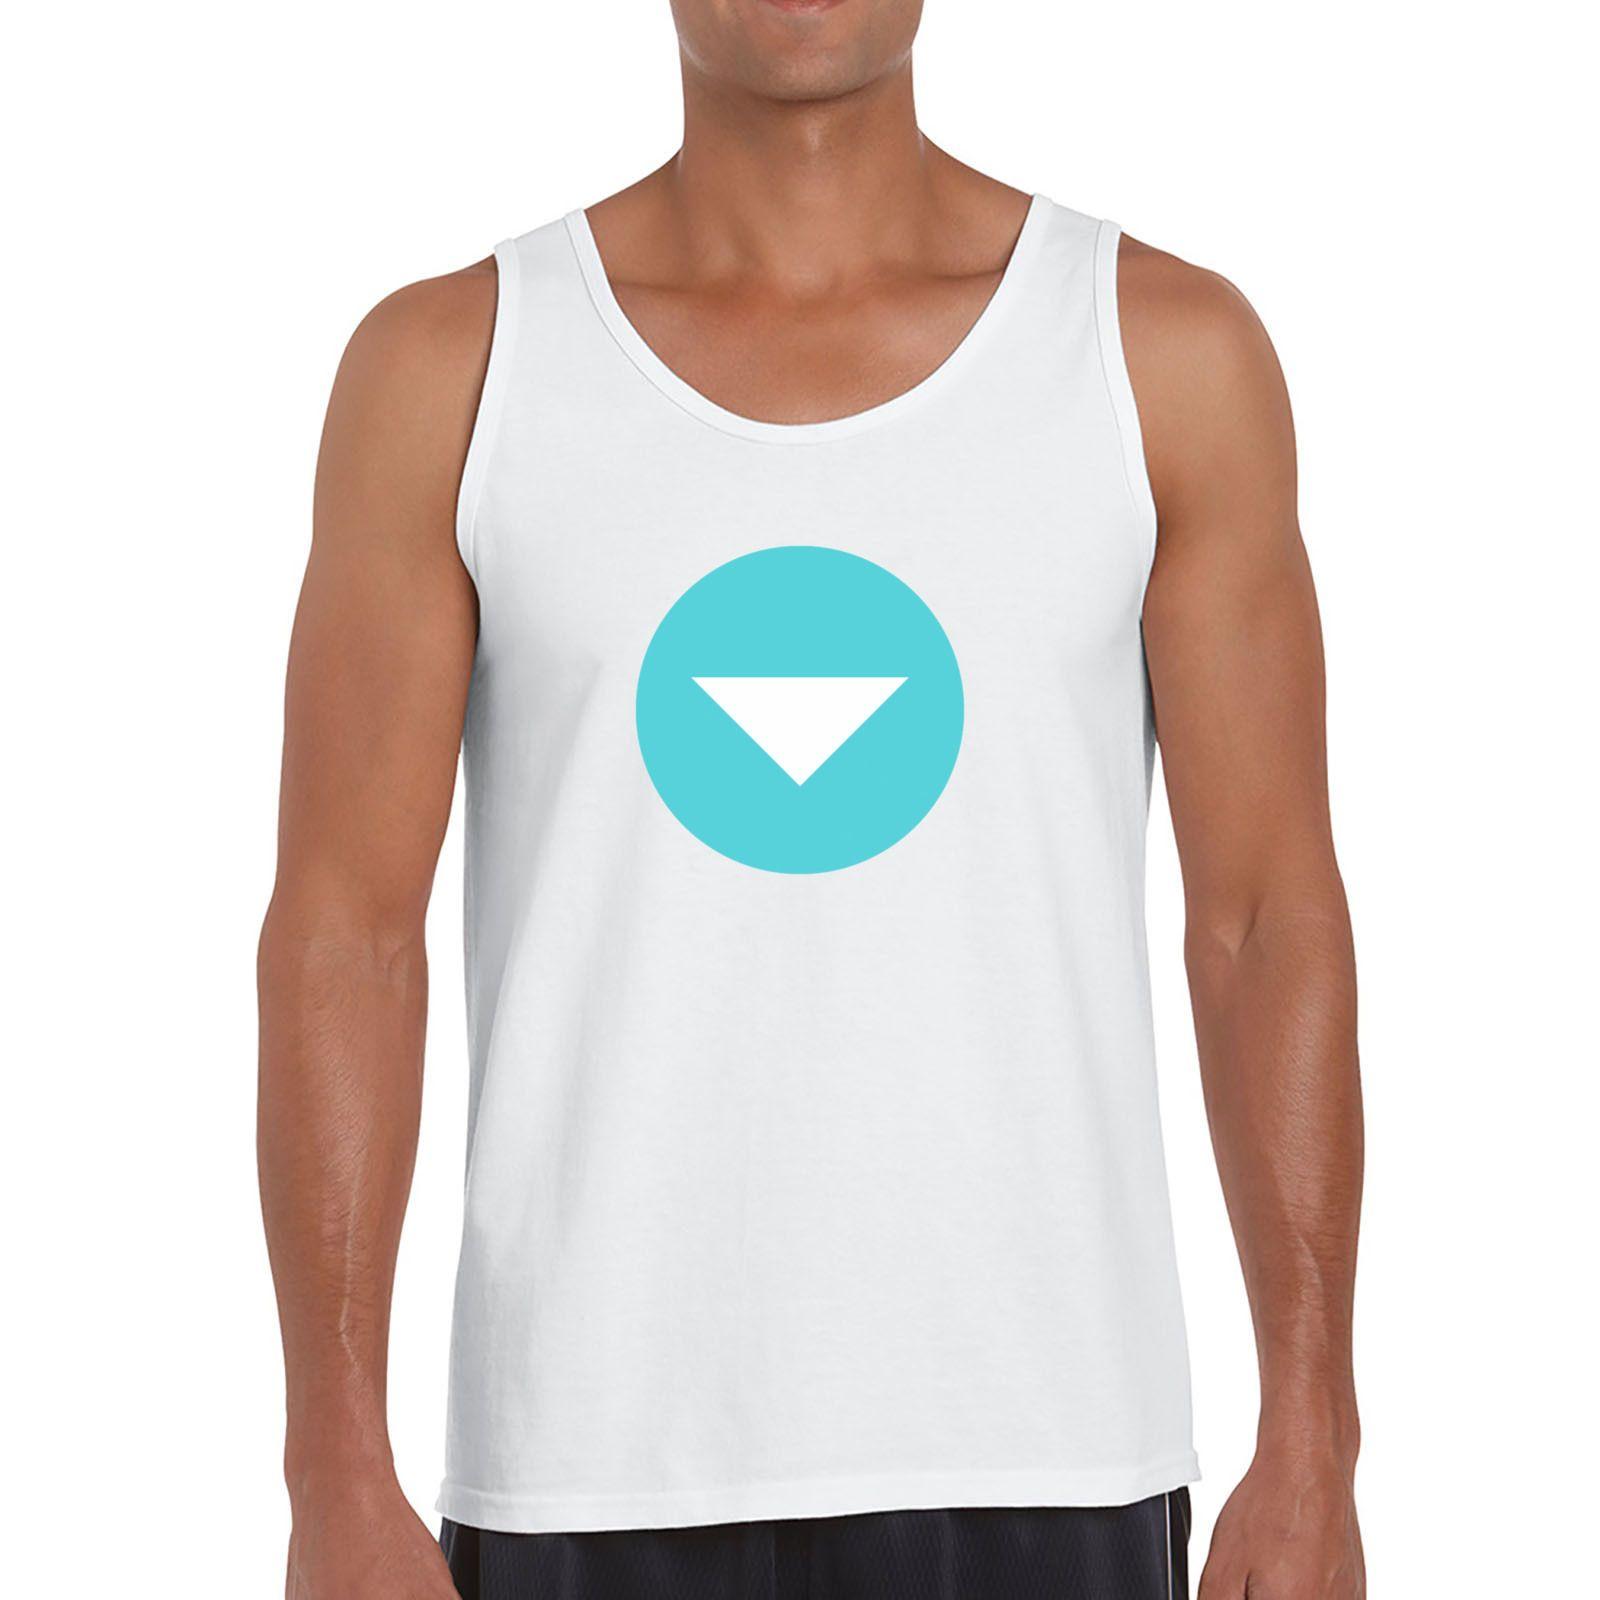 Red Triangle Clothing Logo - Emoji Down Pointing Small Red Triangle Mens Vest. Available in many